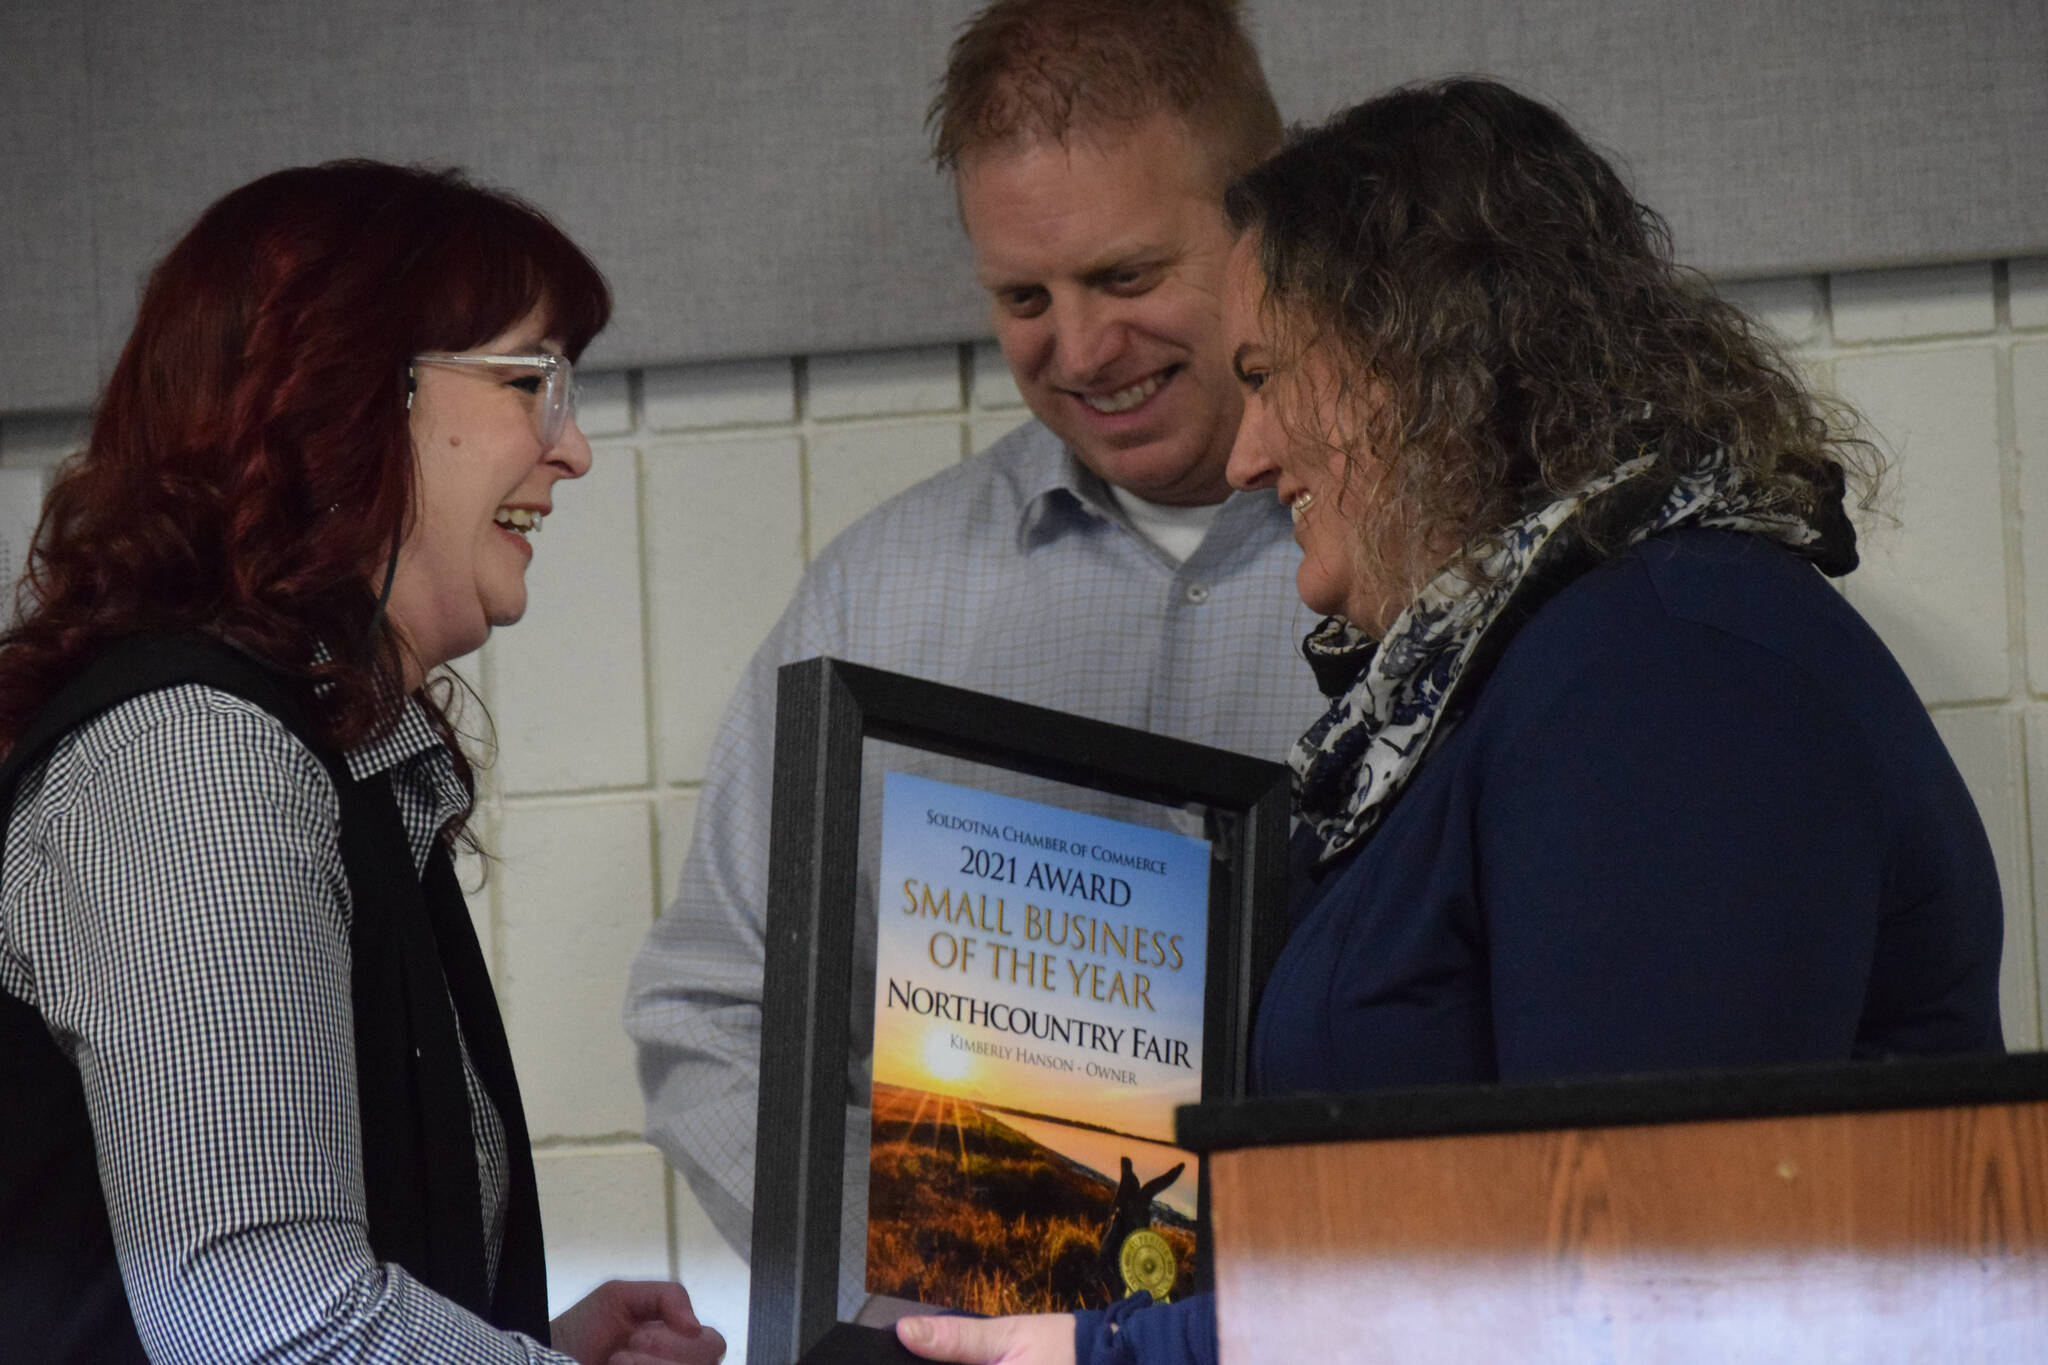 photos by Camille Botello / Peninsula Clarion 
Kimberly Hansen accepts the Soldotna Chamber of Commerce’s small business of the year award from Sara Hondel for her work at Northcountry Fair during the chamber’s 2021 award ceremony Wednesday at the Soldotna Regional Sports Complex.